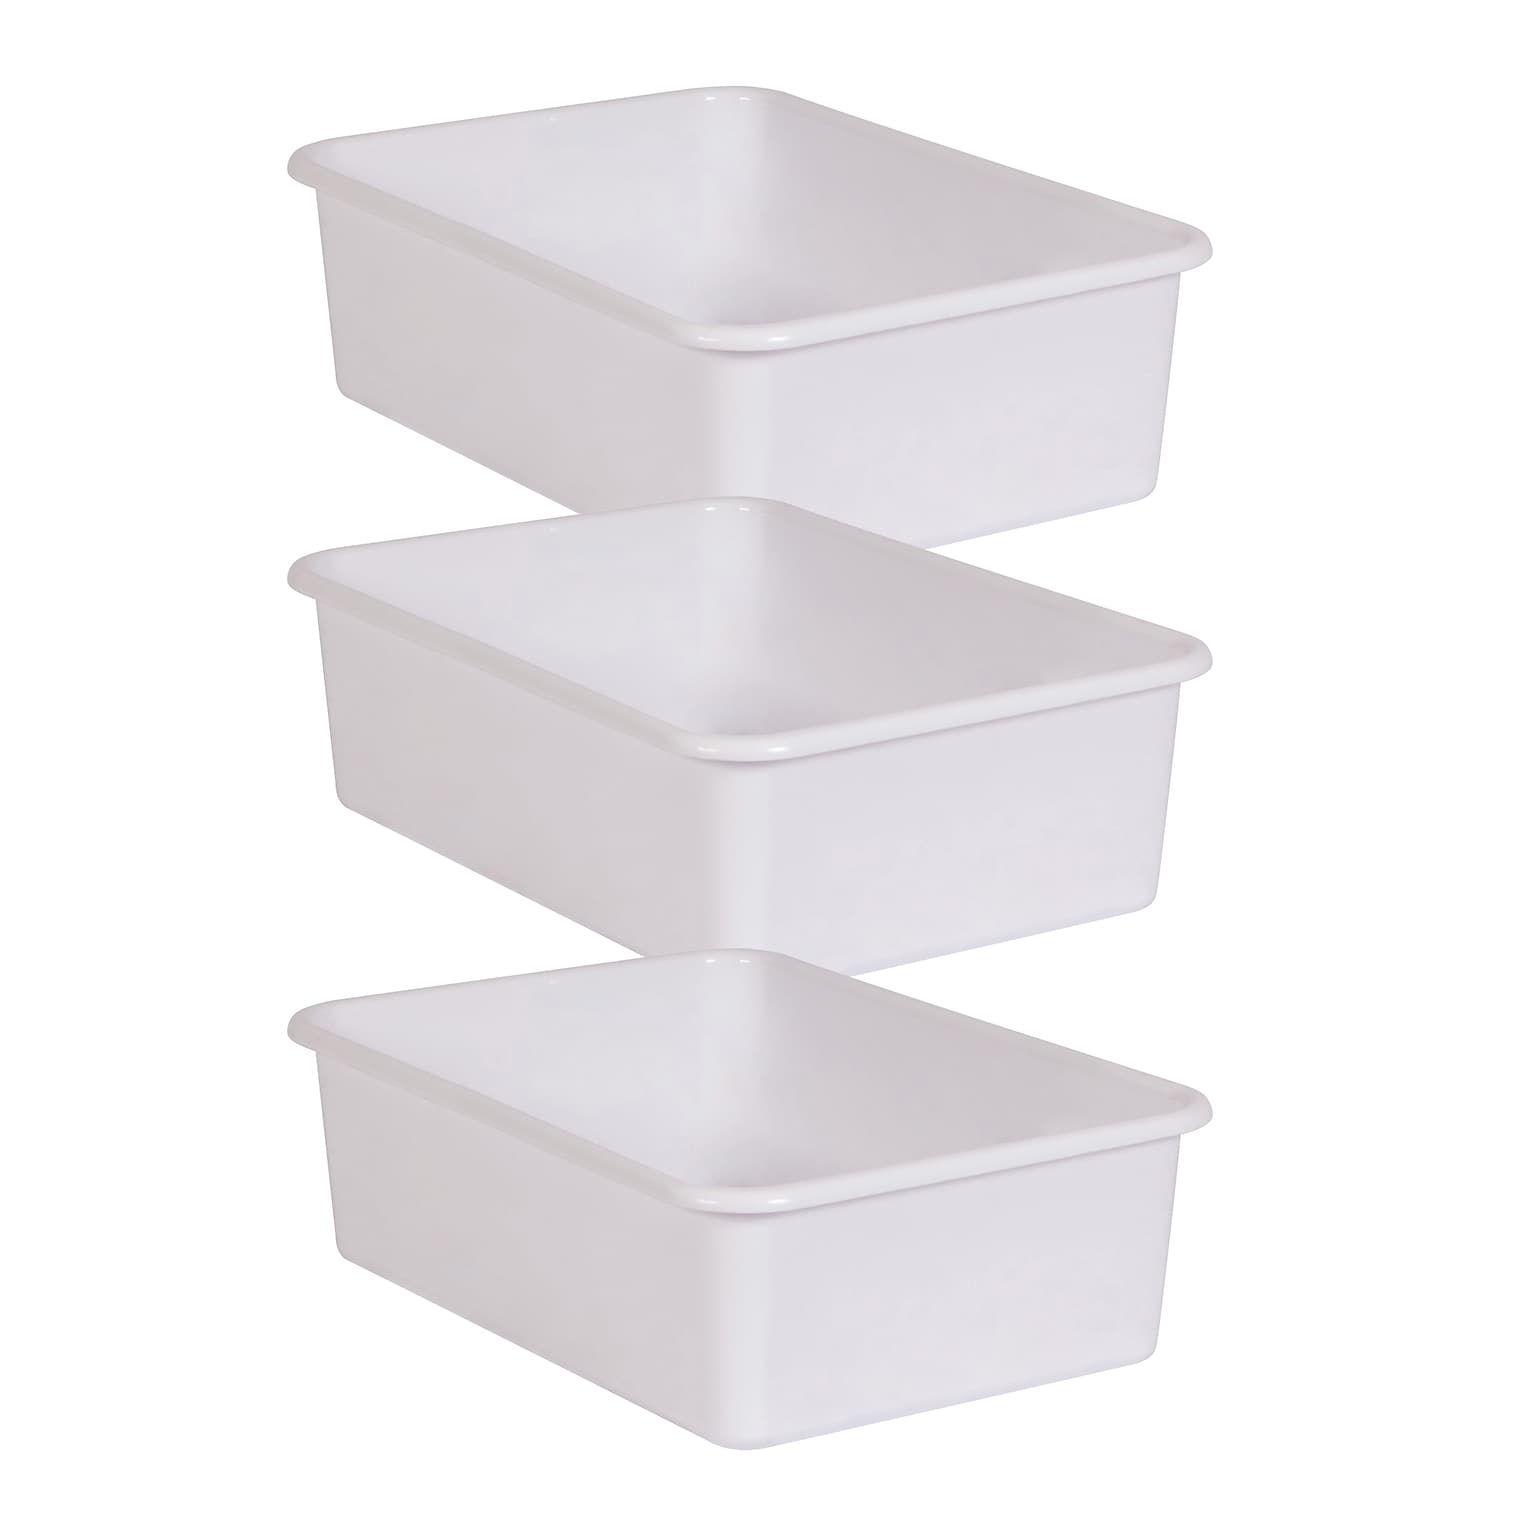 Teacher Created Resources® Plastic Storage Bin, Large, 16.25 x 11.5 x 5, White, Pack of 3 (TCR20417-3)